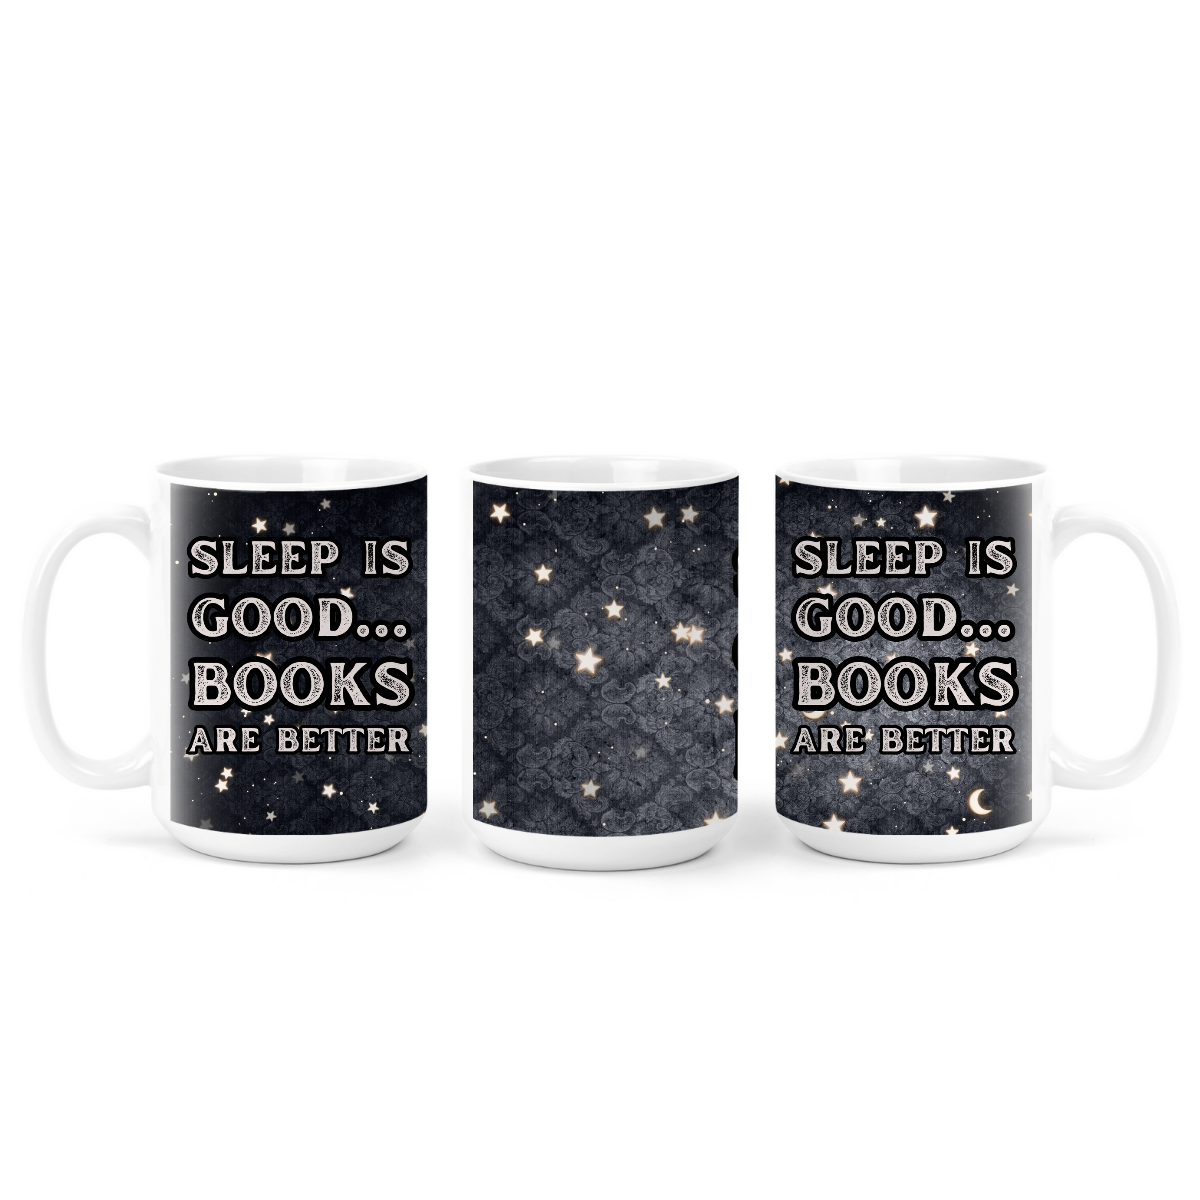 Books Are Better | Mug - The Pretty Things.ca